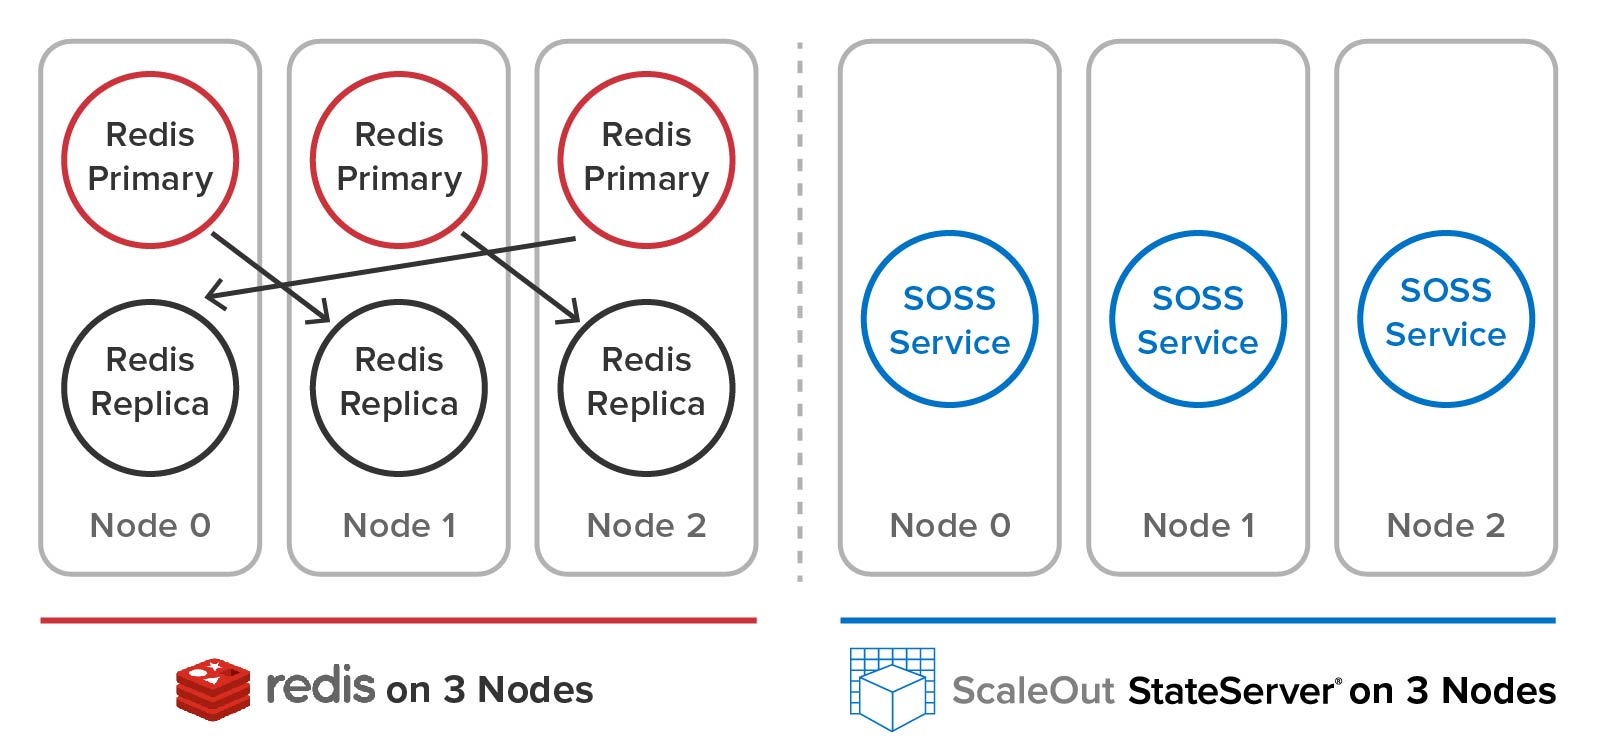 ScaleOut's cluster architecture is much easier to use than Redis